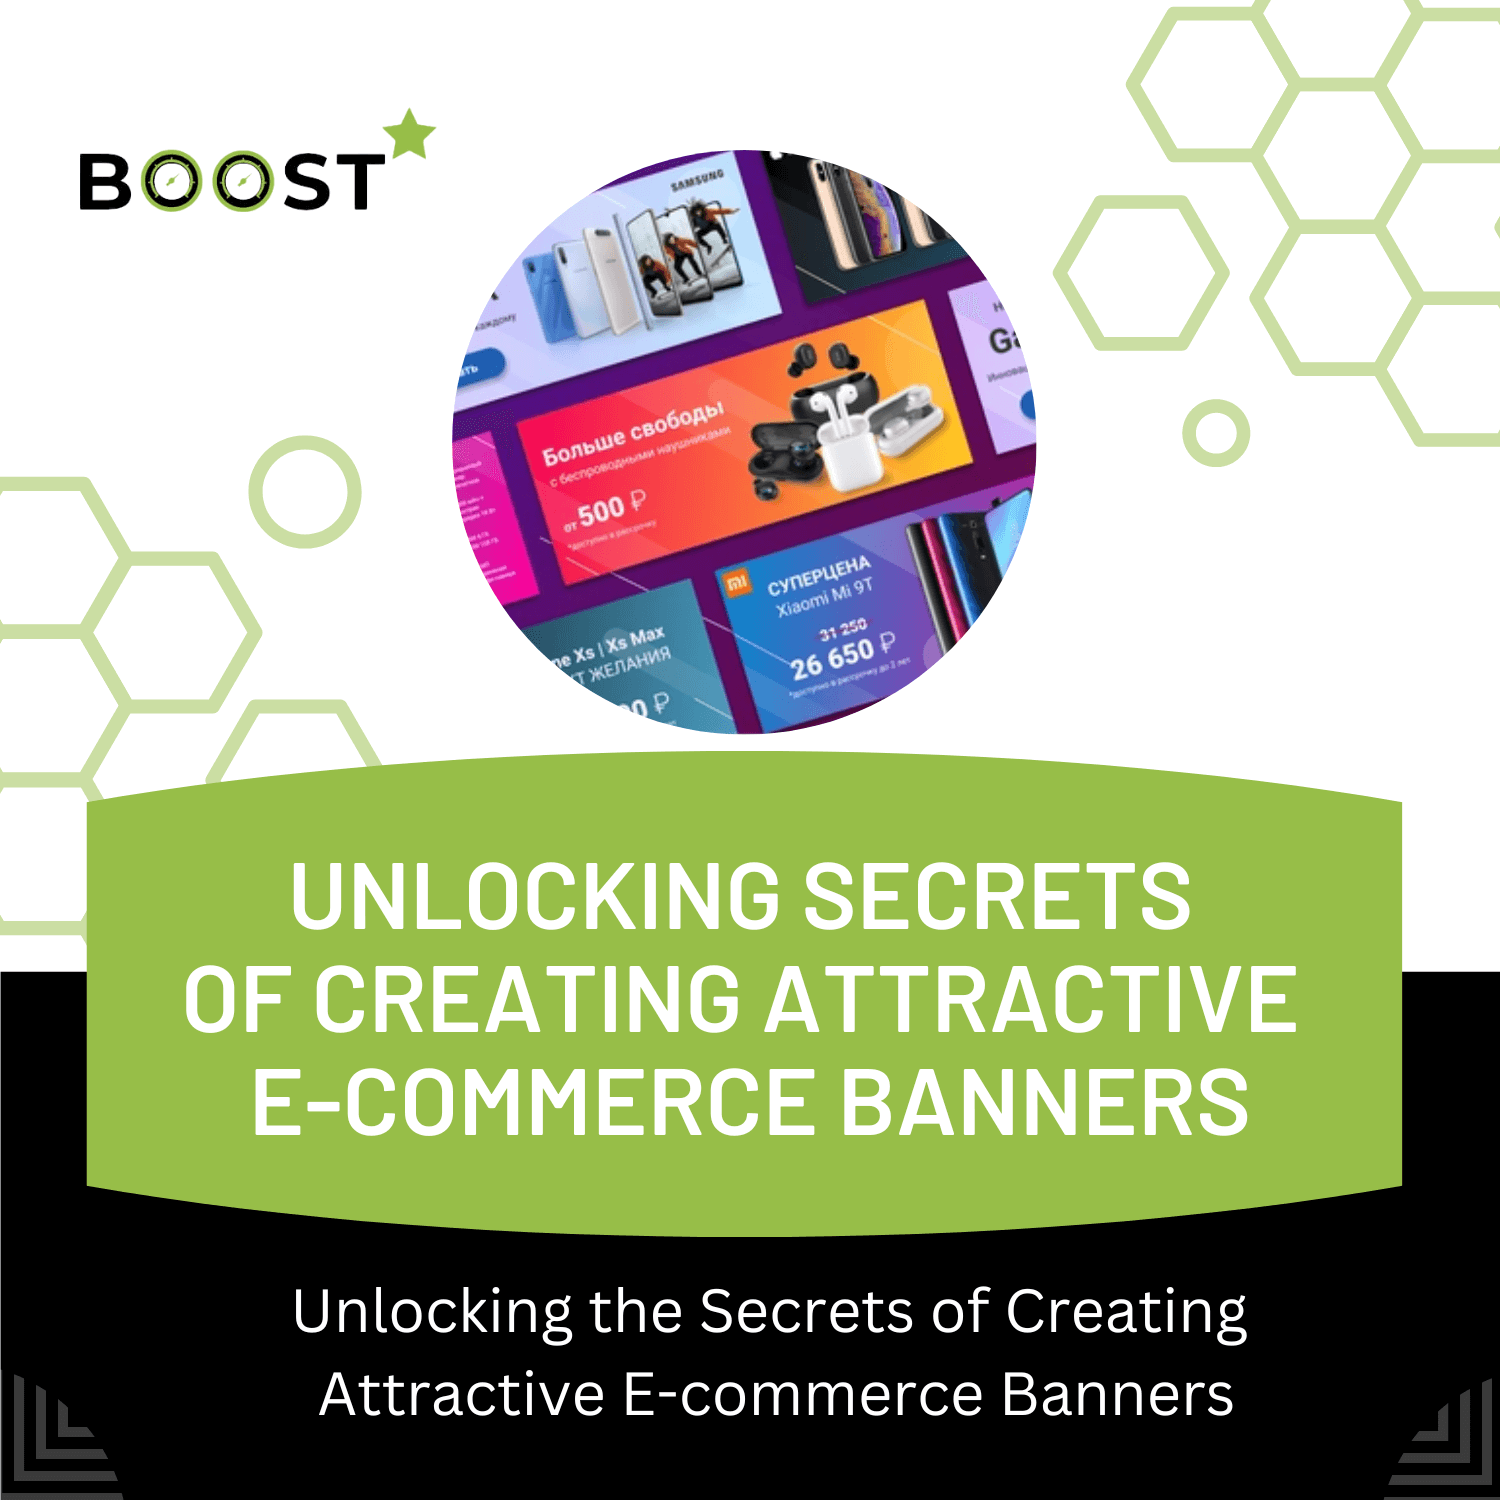 Unlocking the Secrets of Creating Attractive E-commerce Banners